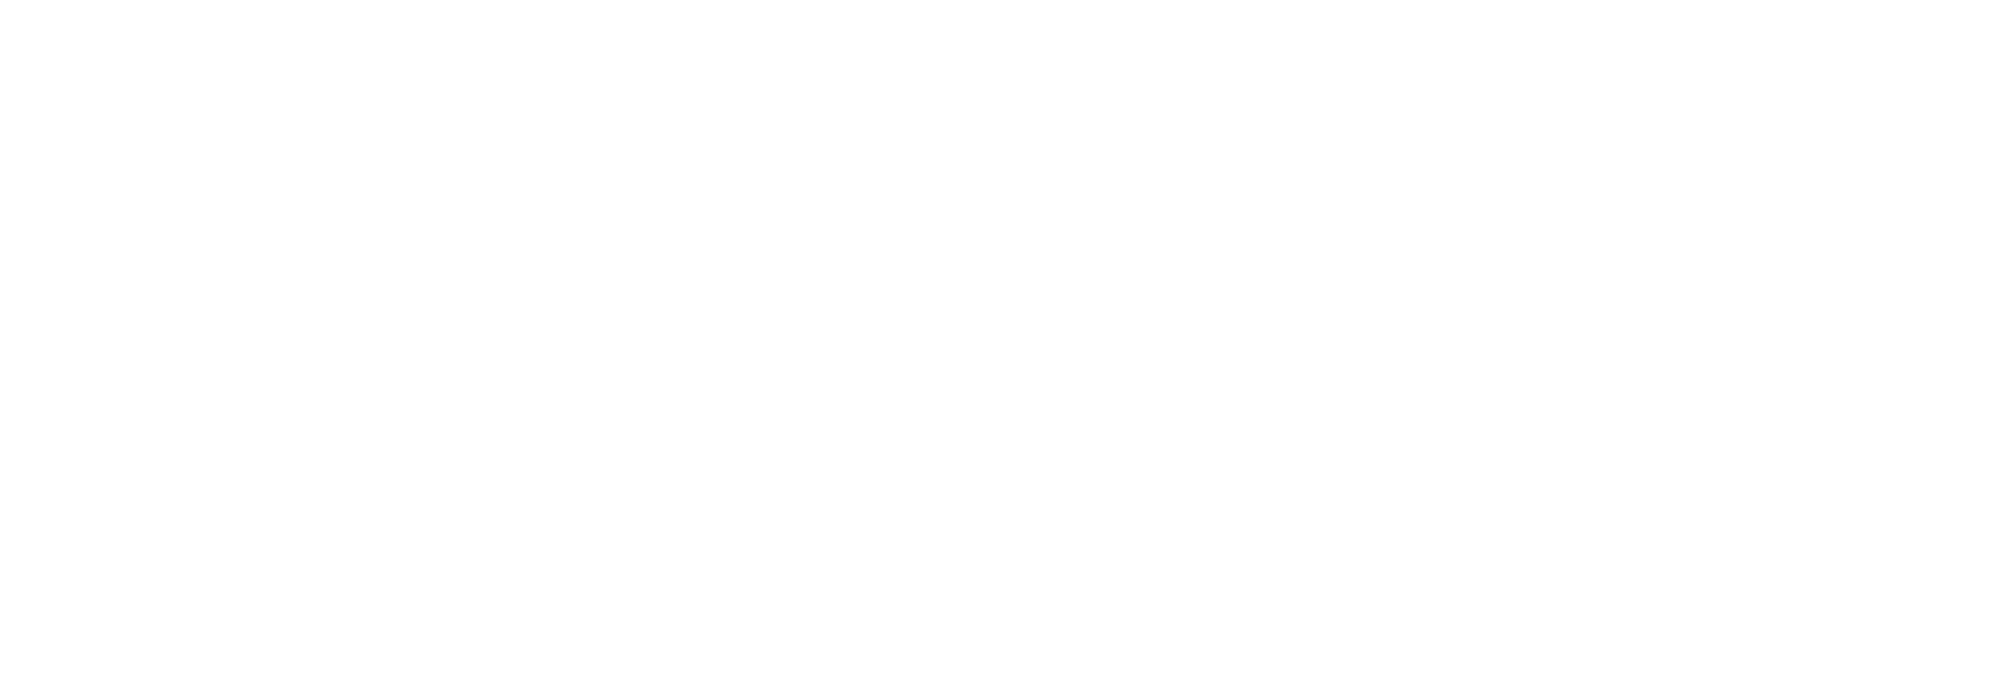 lisa yee therapy logo reversed in white